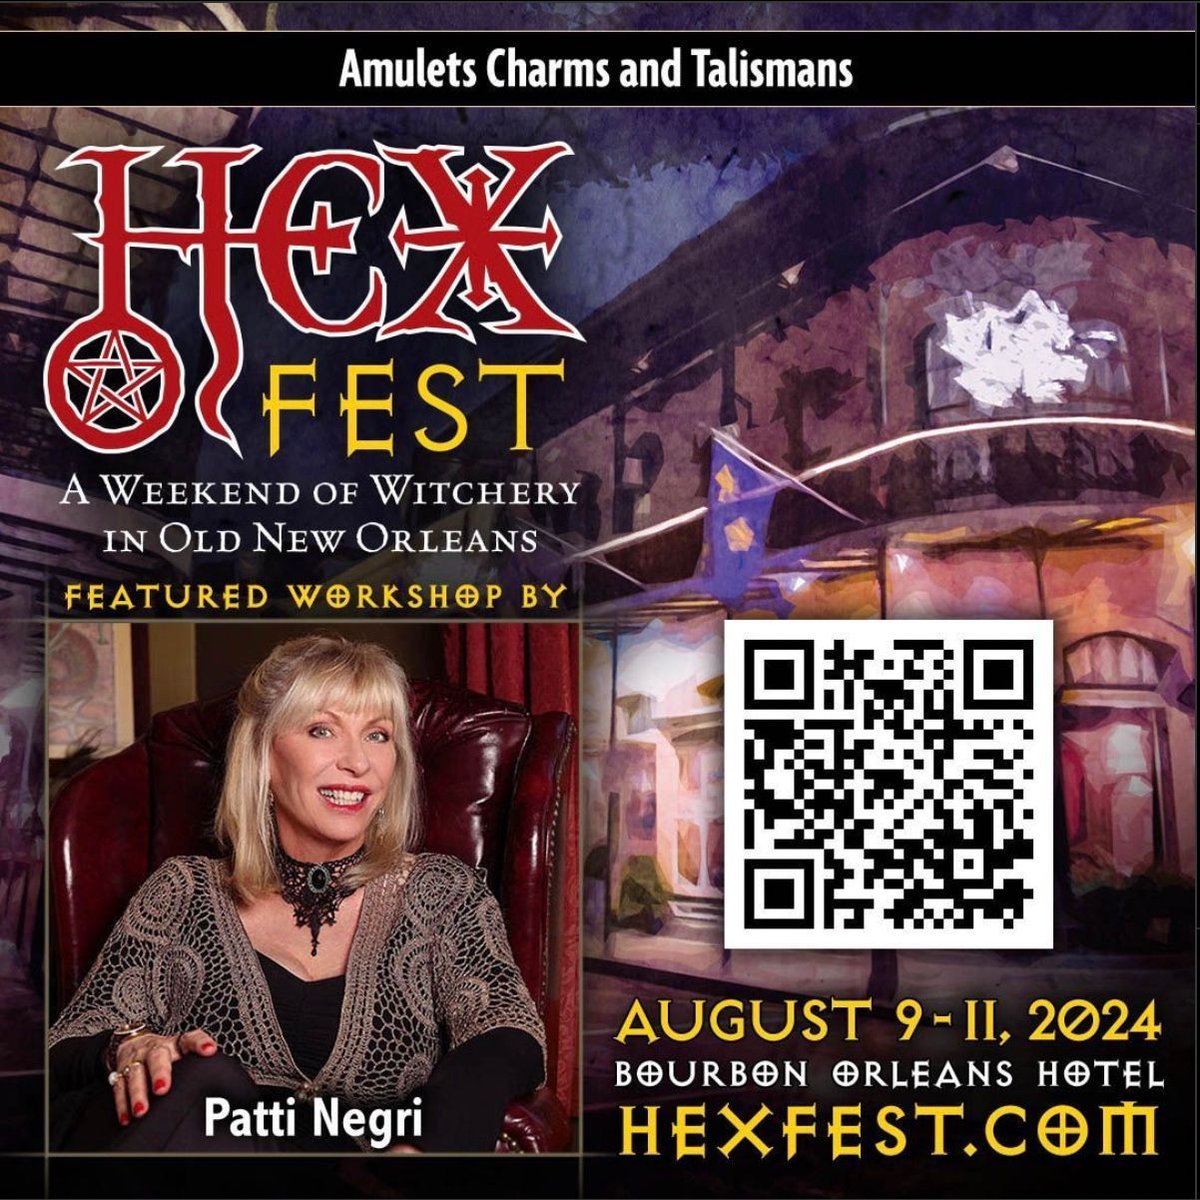 Come see me at Hexfest in the witchy town of New Orleans! I will be leading workshops in Witches Familiars, Divination, and Amulets, Charms, and Talismans. Come buy tickets before they sell out! buff.ly/4dIPVlk